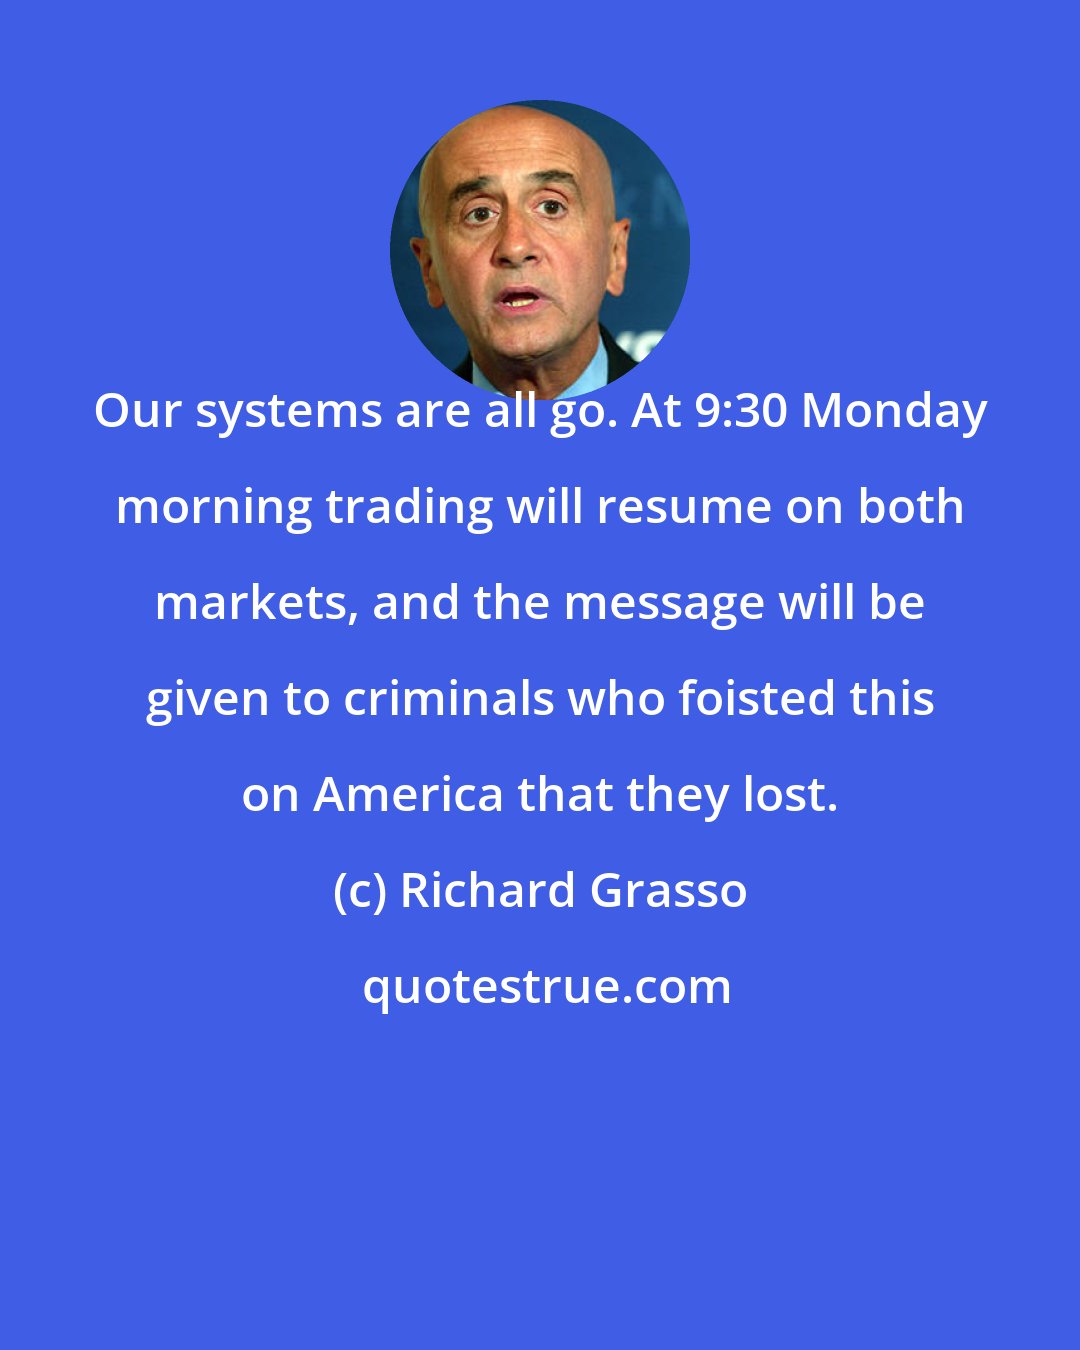 Richard Grasso: Our systems are all go. At 9:30 Monday morning trading will resume on both markets, and the message will be given to criminals who foisted this on America that they lost.